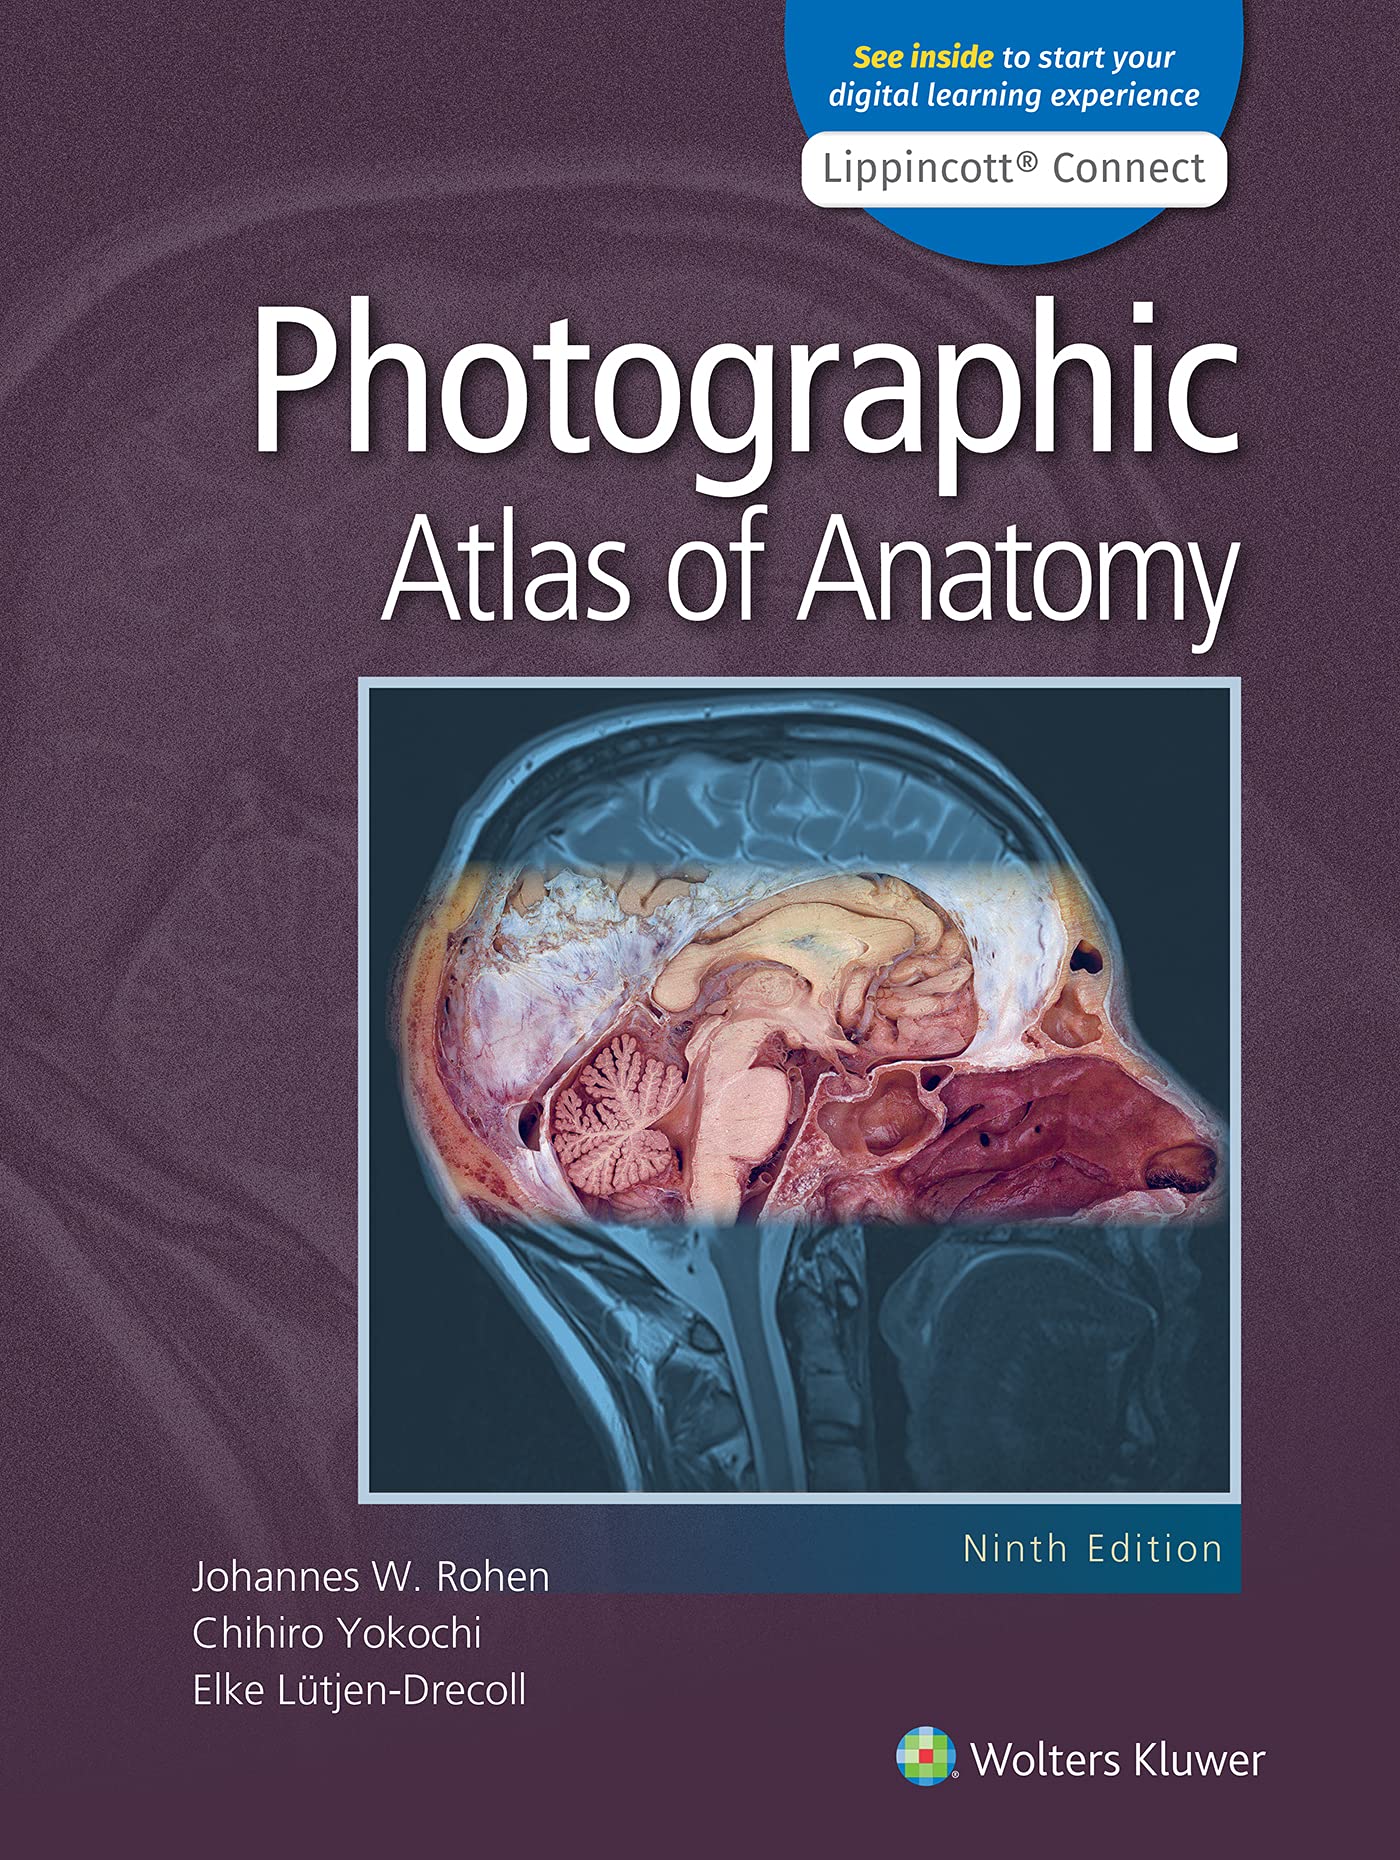 Photo of ANATOMY A PHOTOGRAPHIC ATLAS 9TH EDITION PDF Free Download